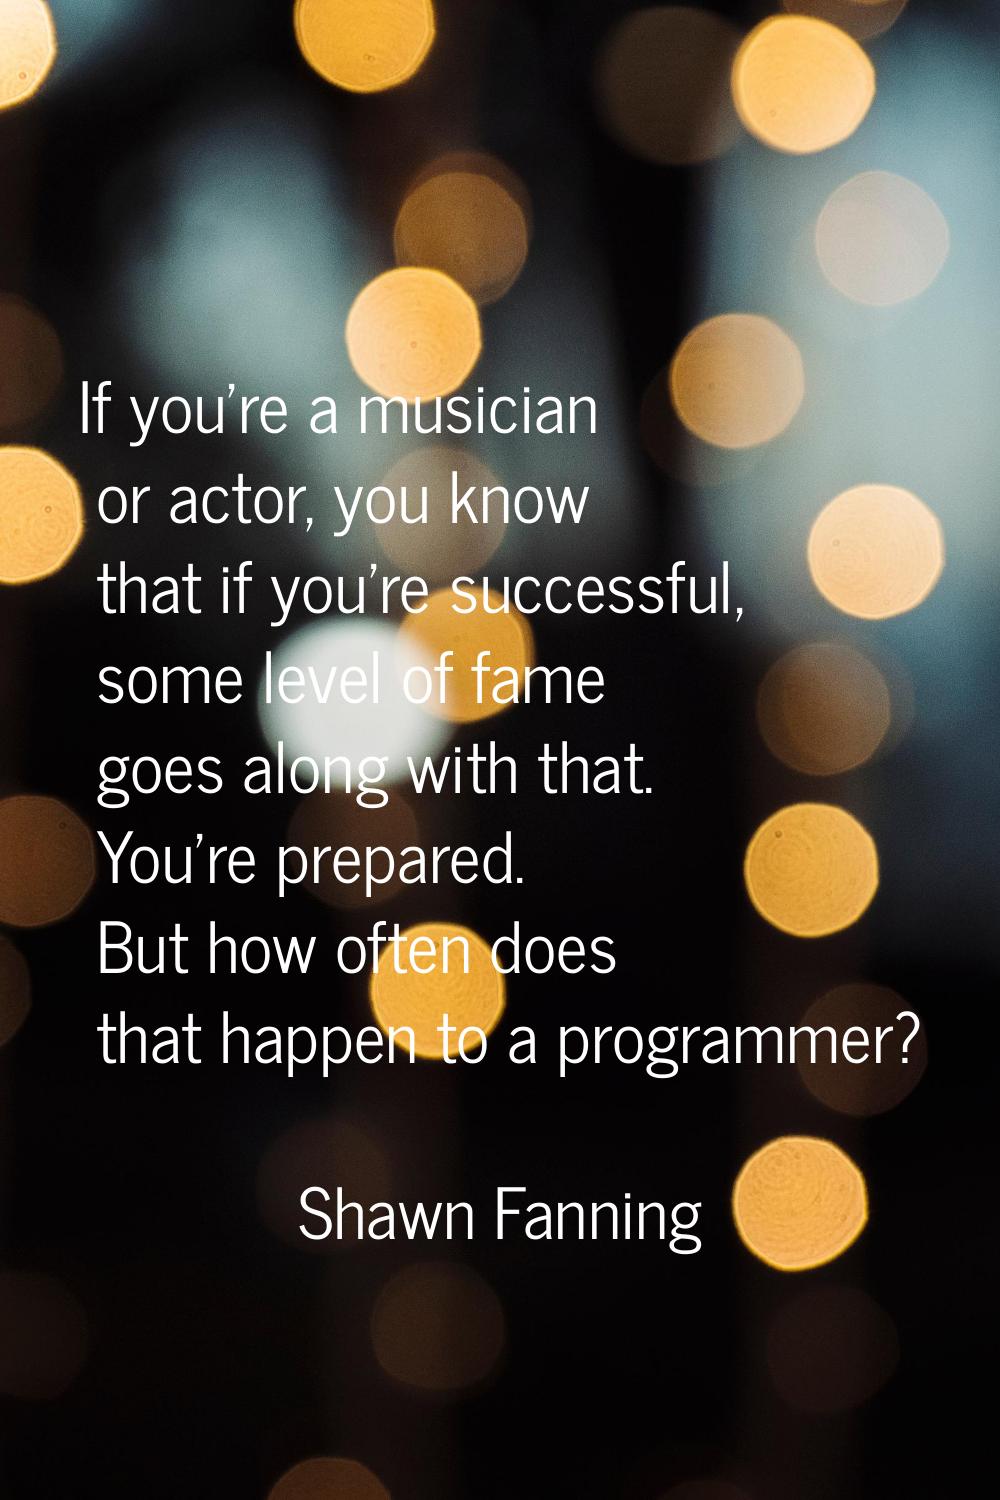 If you're a musician or actor, you know that if you're successful, some level of fame goes along wi